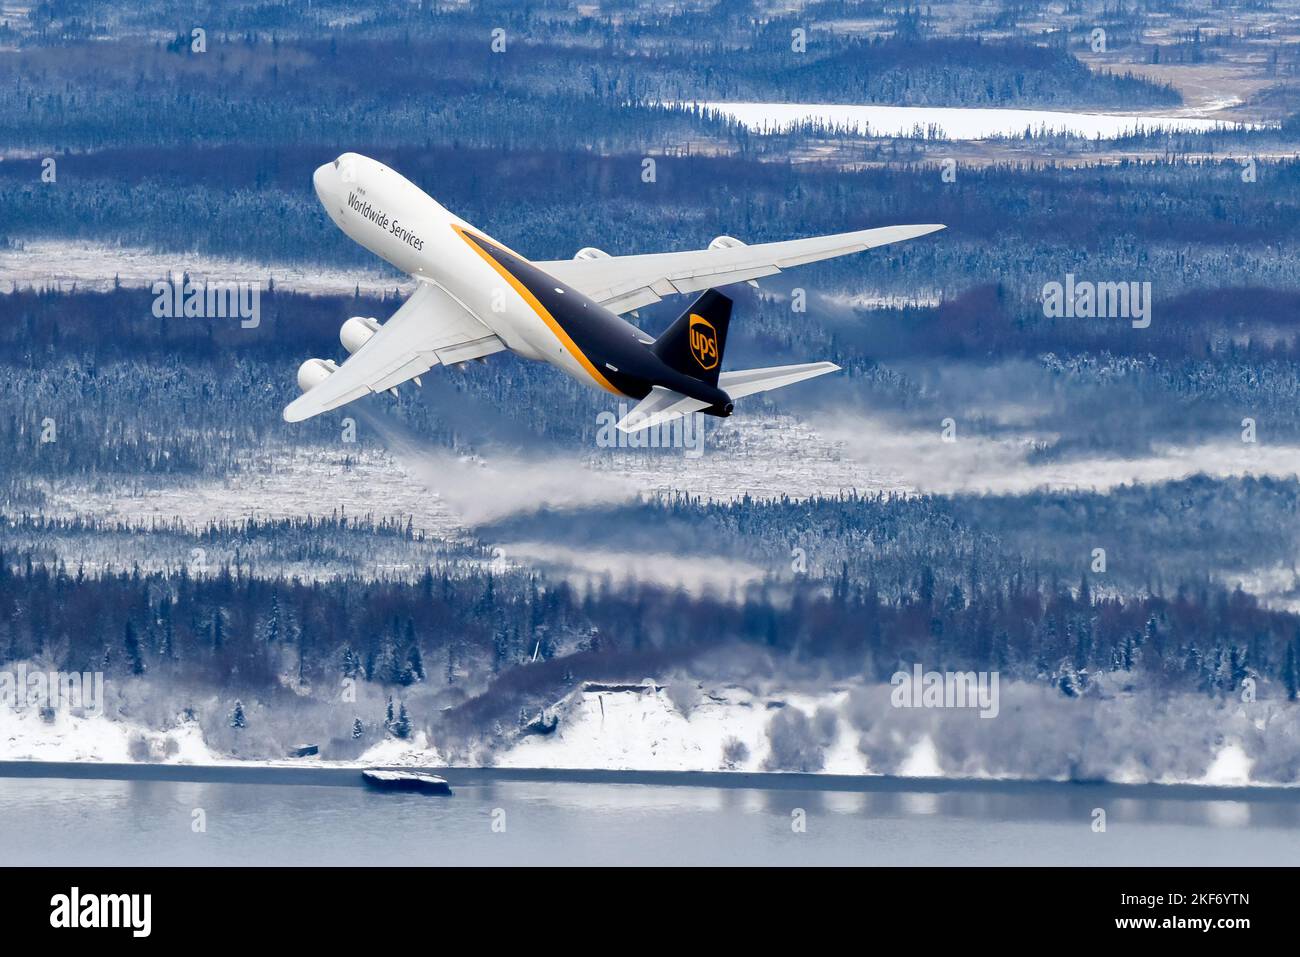 UPS Cargo Boeing 747-8F aircraft banking after take off. Airplane of UPS Cargo 747 freighter departure with winter landscape below. Plane N607UP. Stock Photo